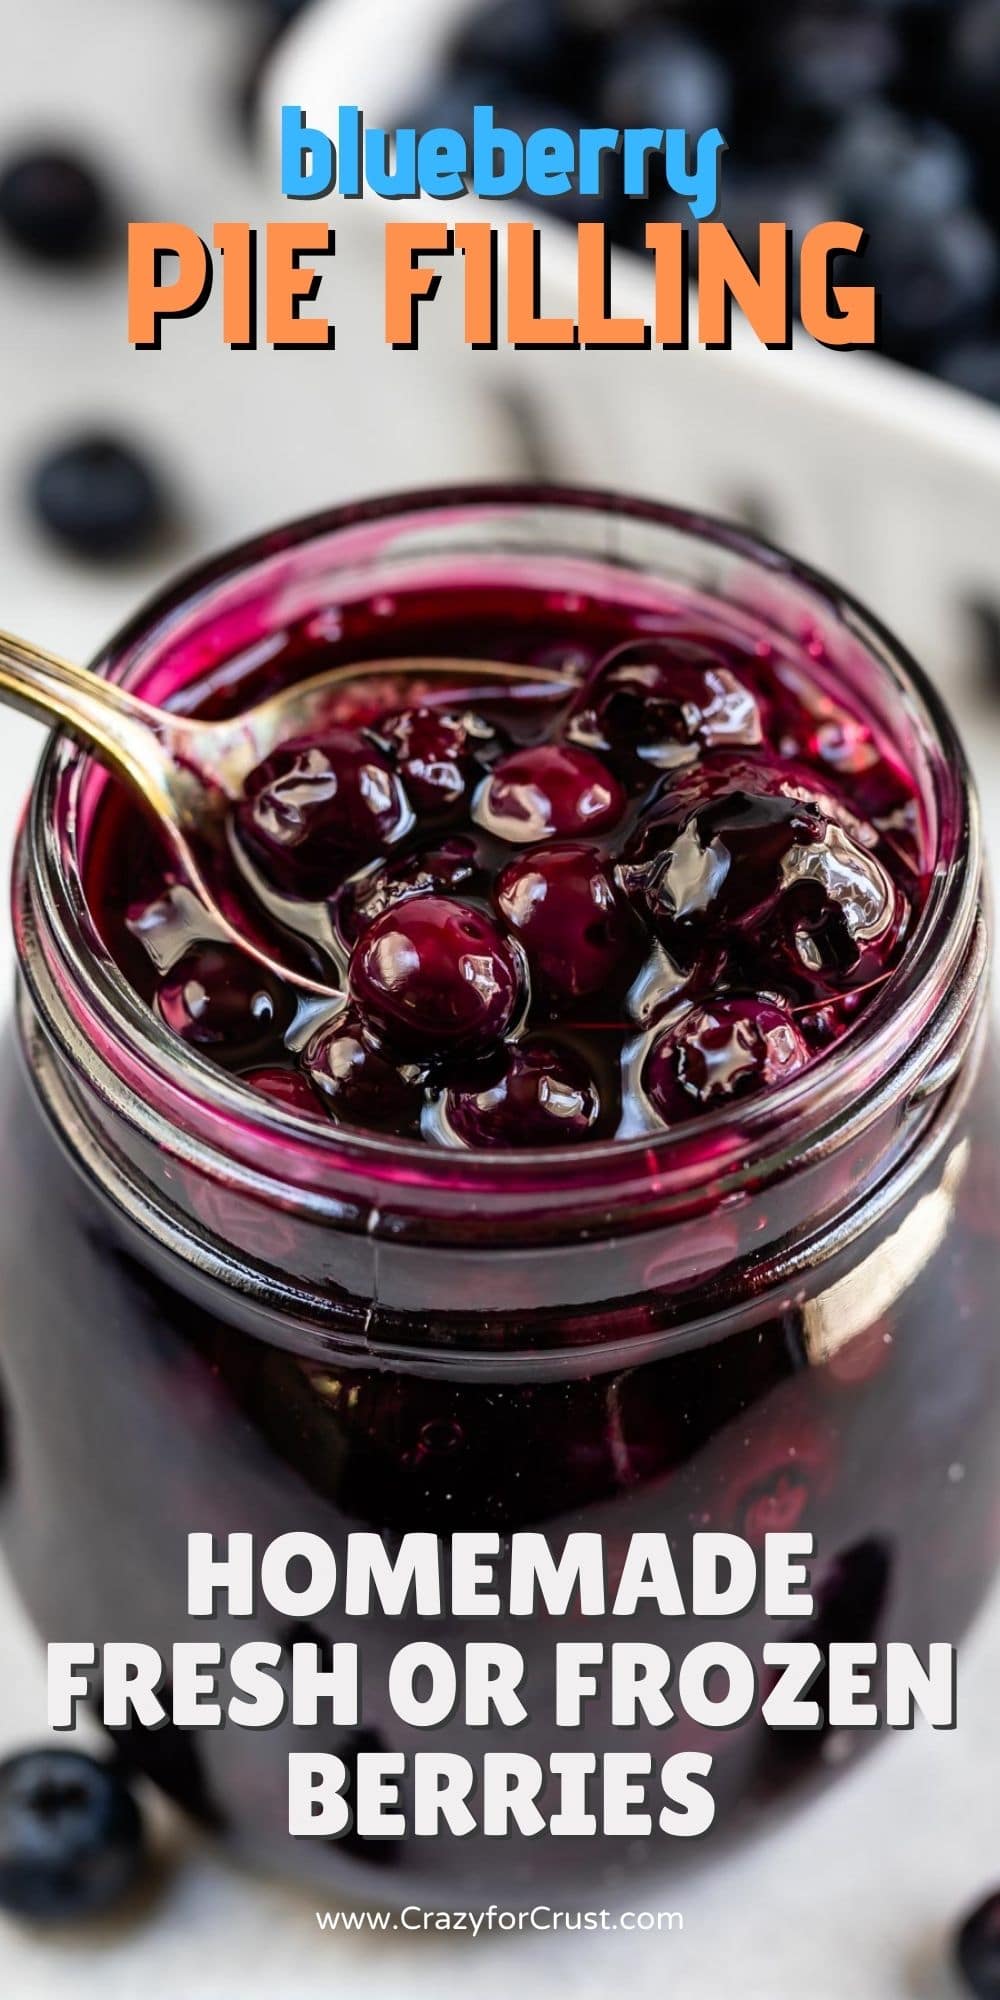 BLUEBERRY PIE FILLING 